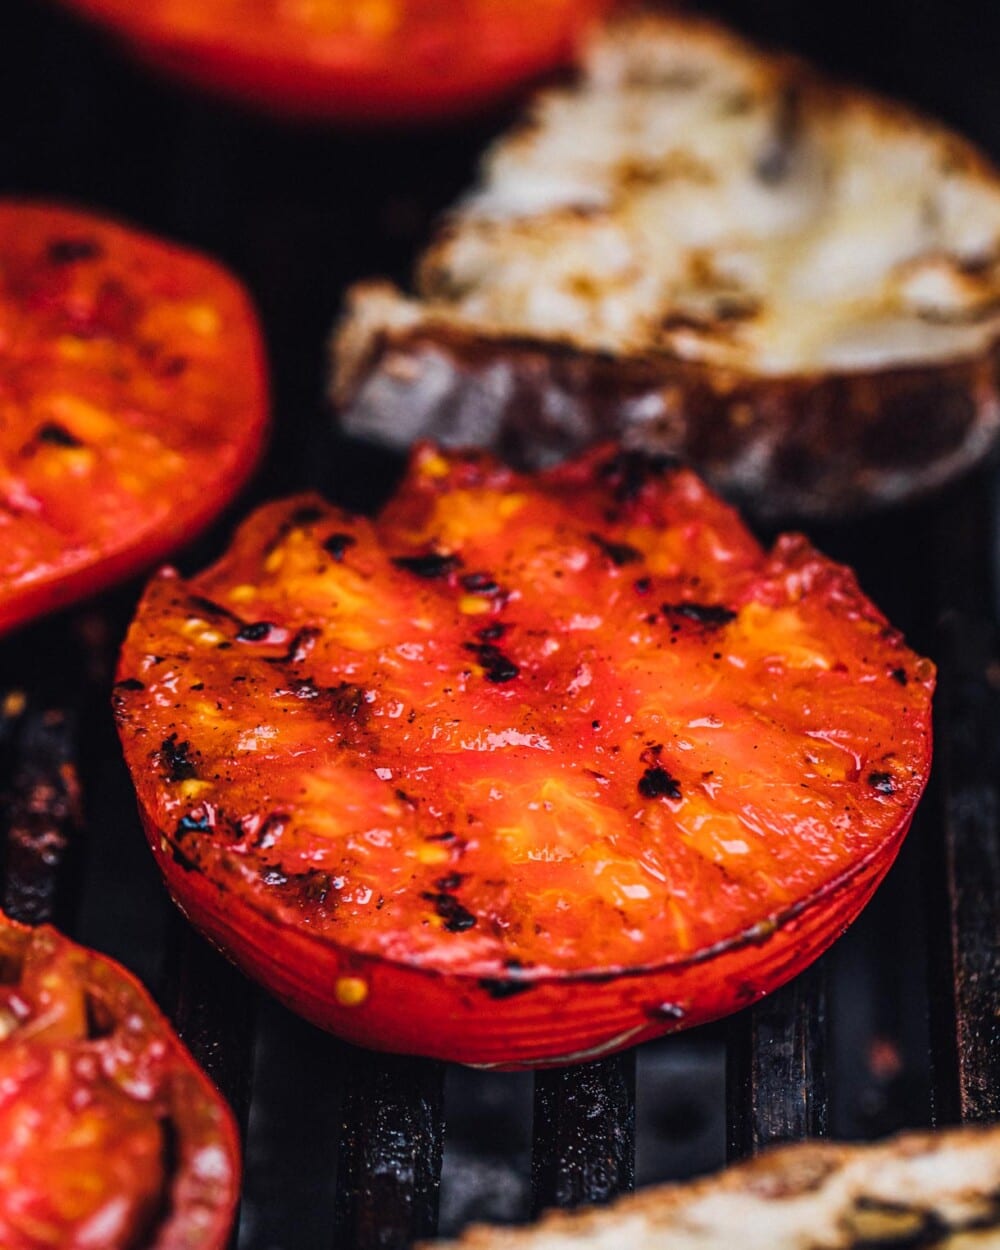 tomatoes on a grill, with char marks